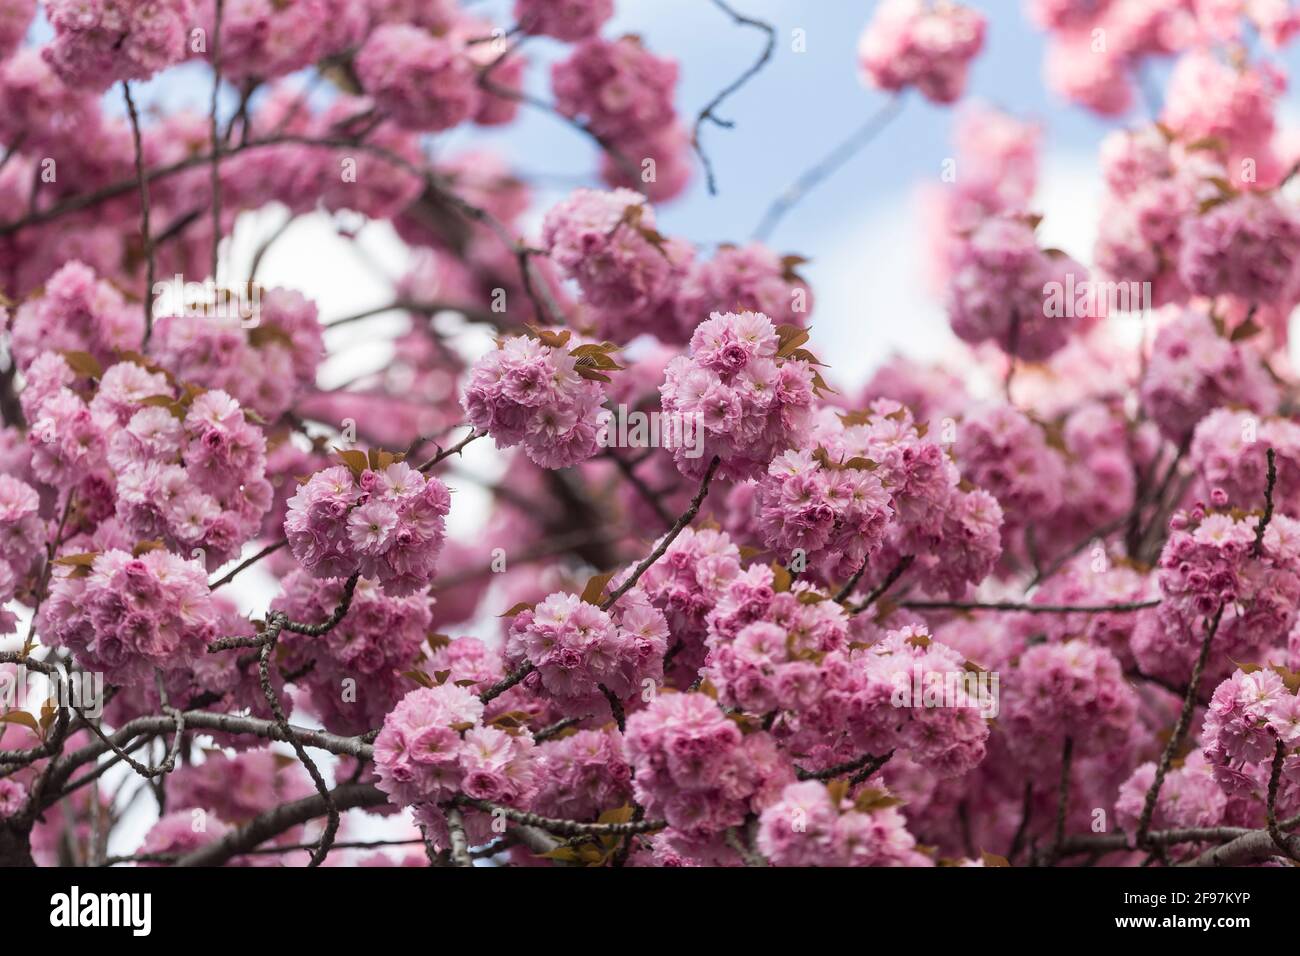 Blooming cherry blossoms, sakura trees in Bonn, former capital of Germany on Heerstrasse Stock Photo